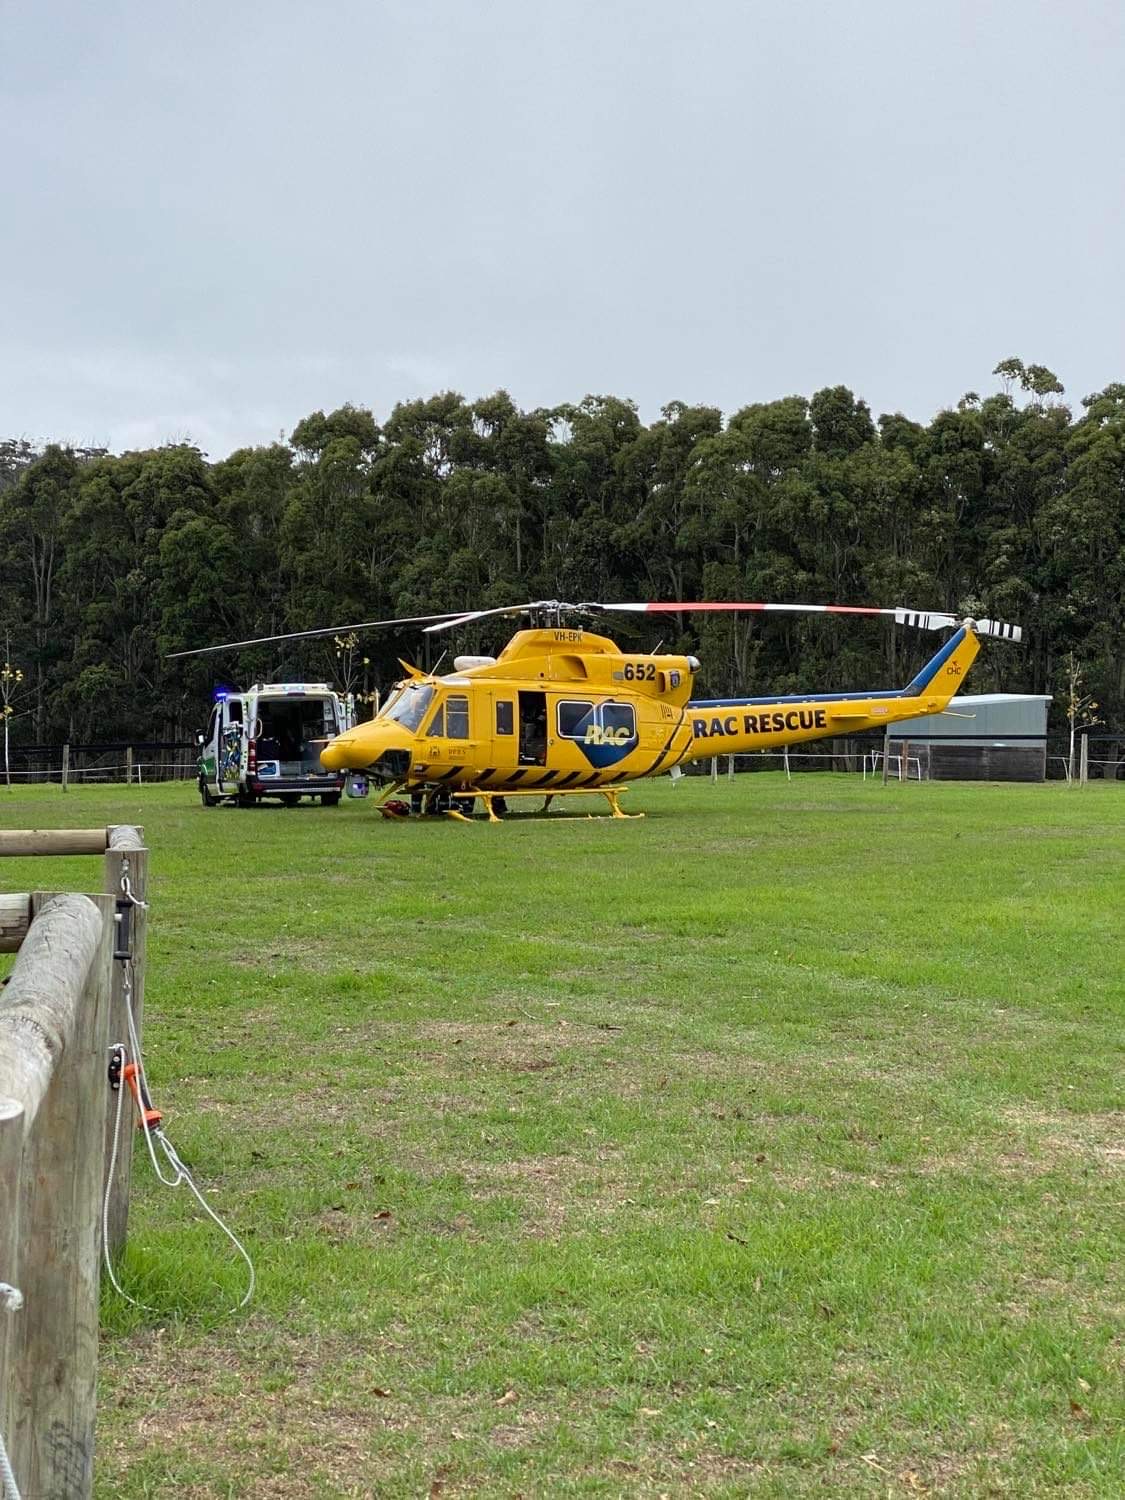 The RAC rescue helicopter is on the ground in a green paddock assisting a fallen horserider